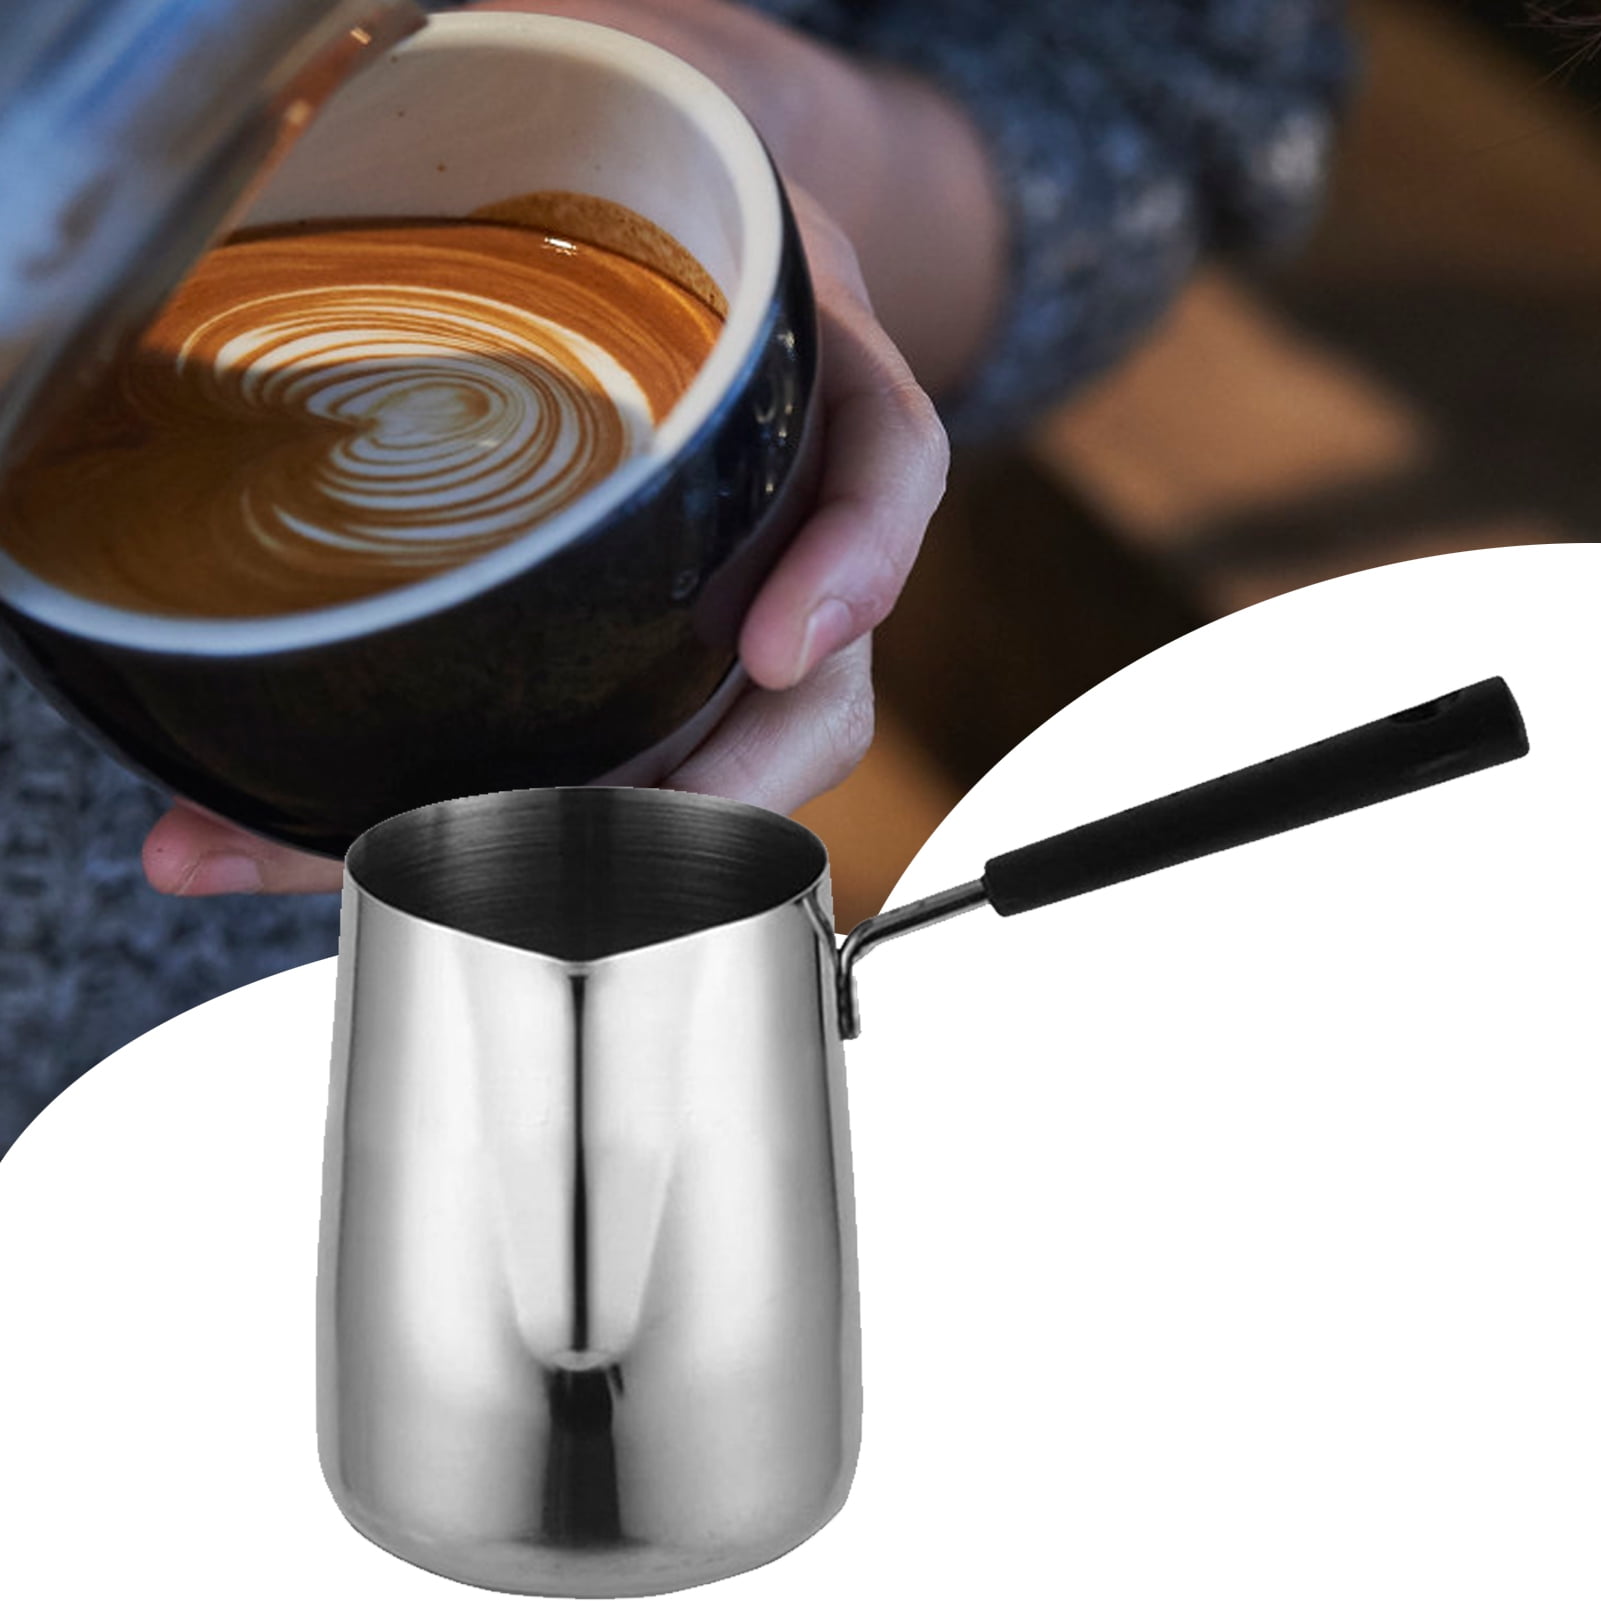 Stainless Steel Milk Frothing Pitcher Coffee Cup Latte Art Milk Frother Jug